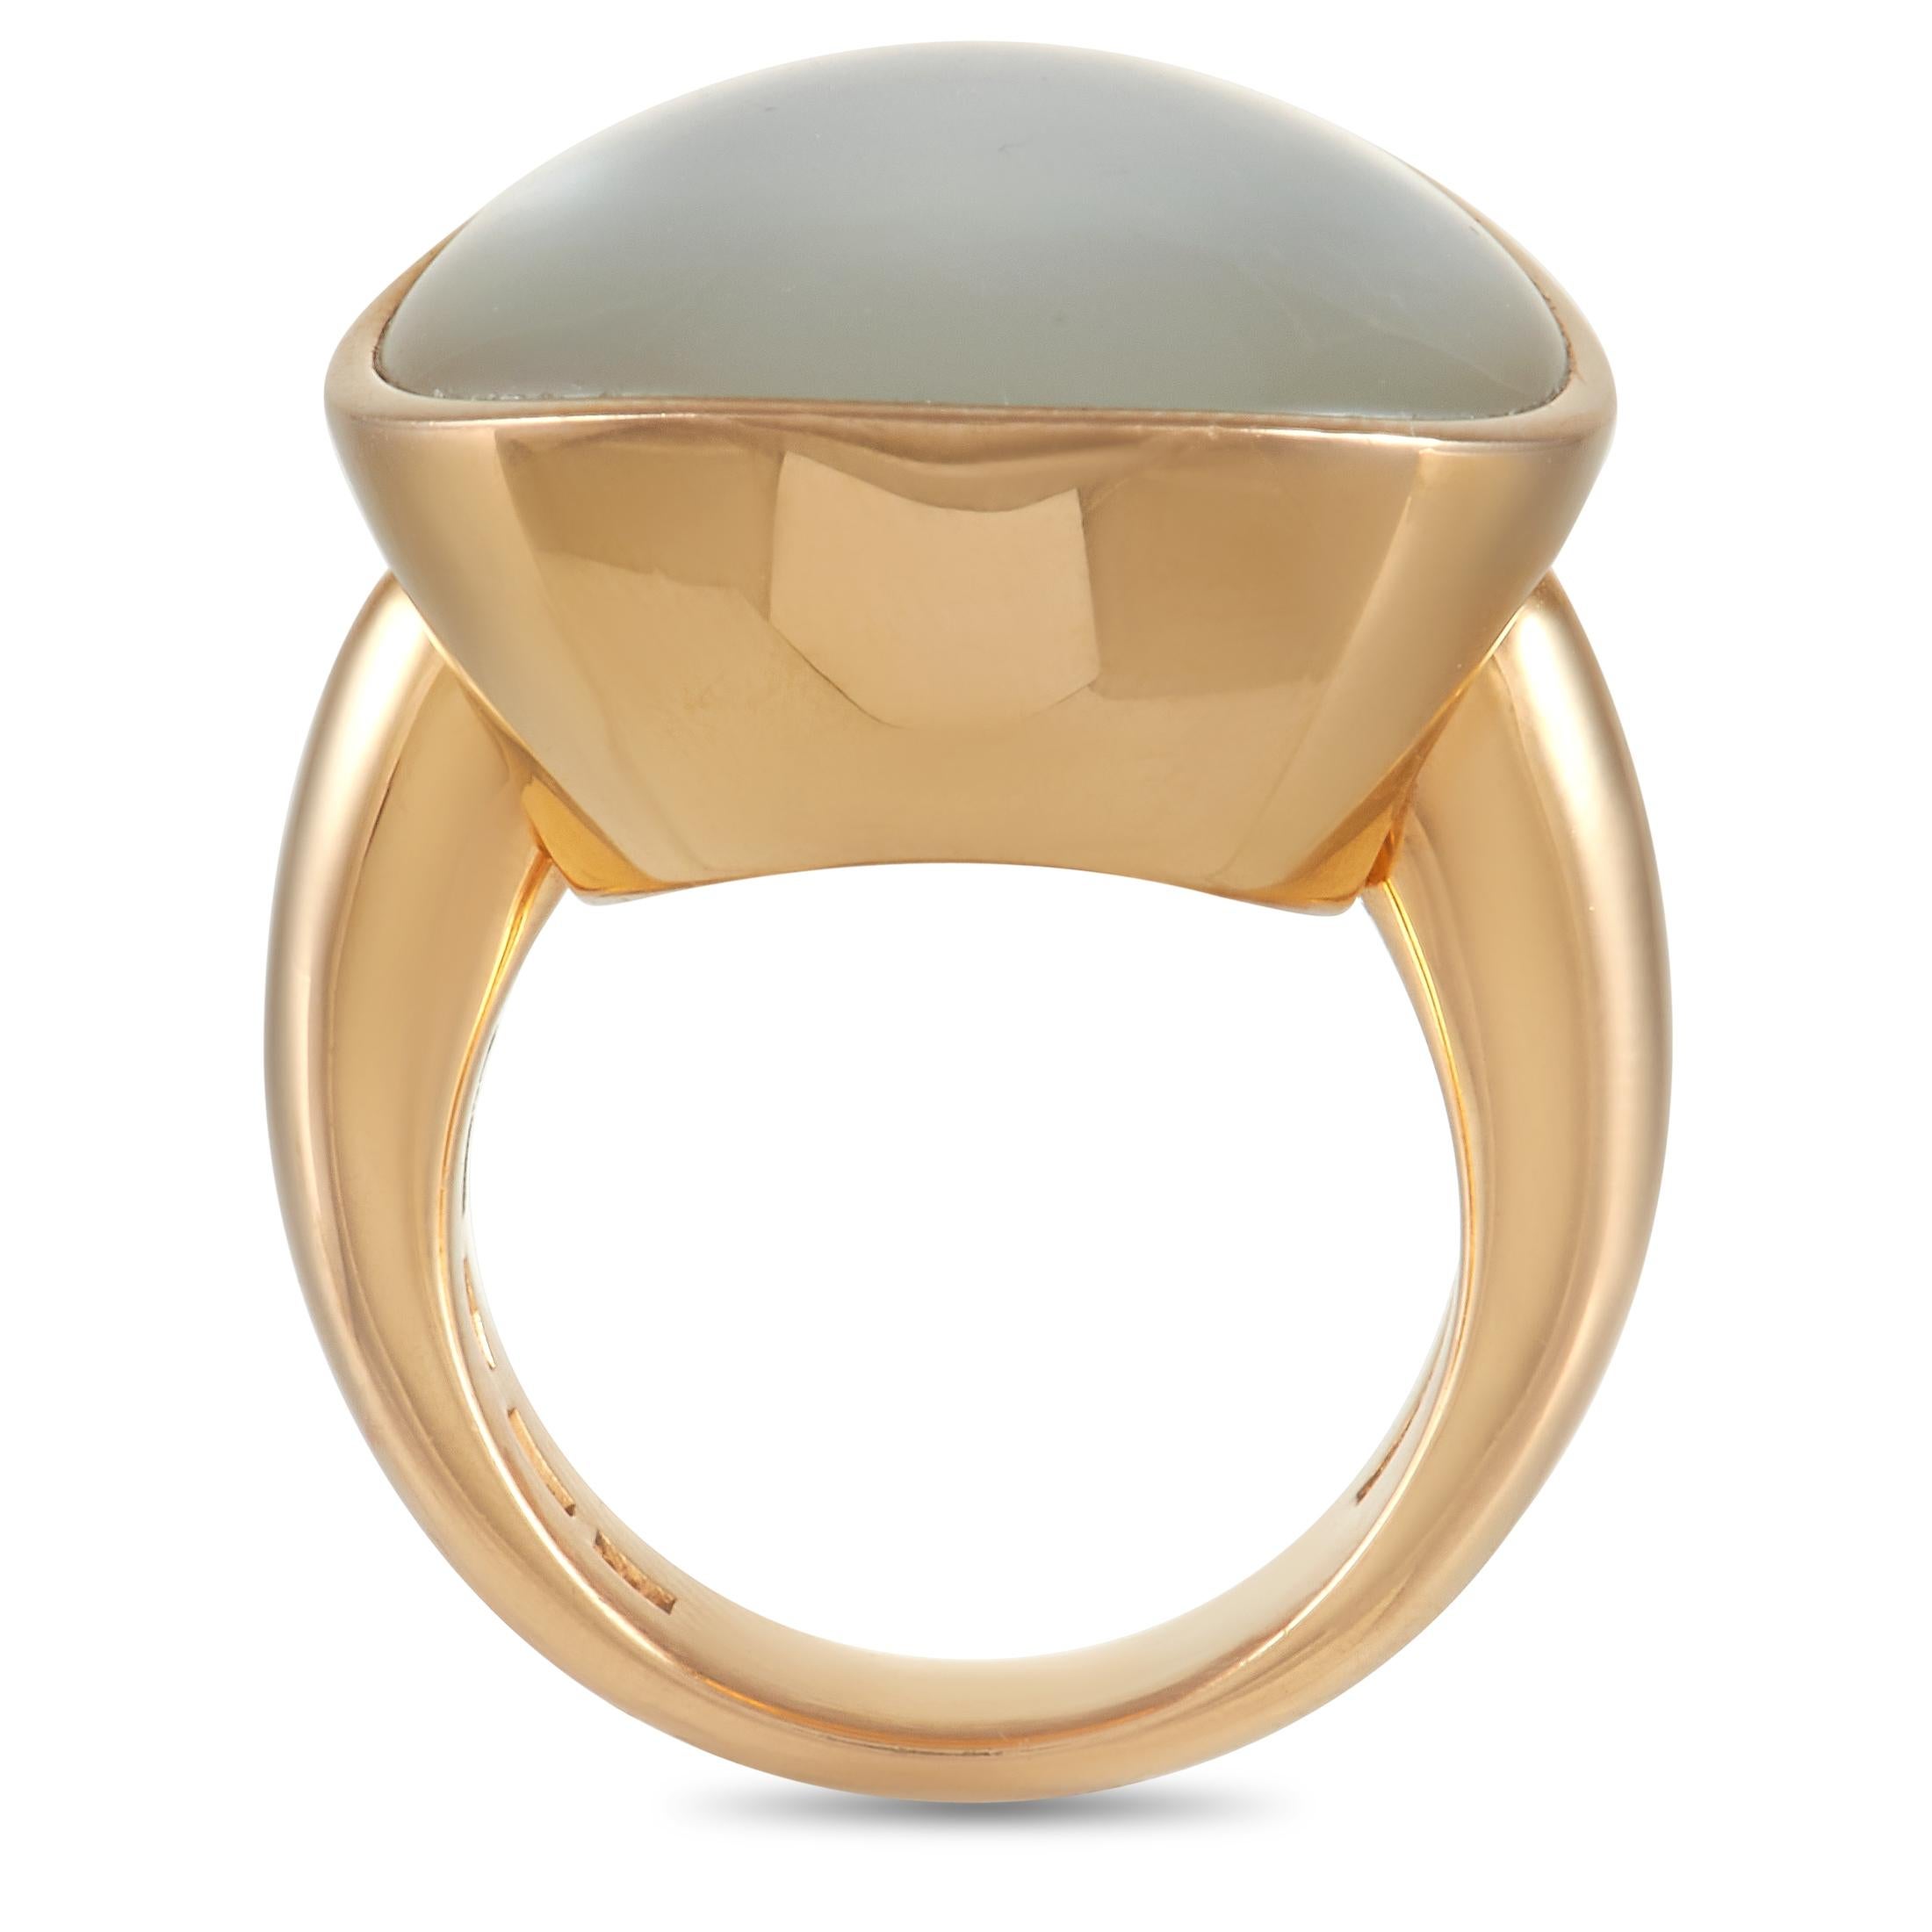 This Vhernier Giotto ring is stunning in its simplicity. The minimalist design pairs a sleek 18K Rose Gold setting – which features a 5mm wide band and a 10mm top height – with a large, circular Mother of Pearl center stone. The result is a piece